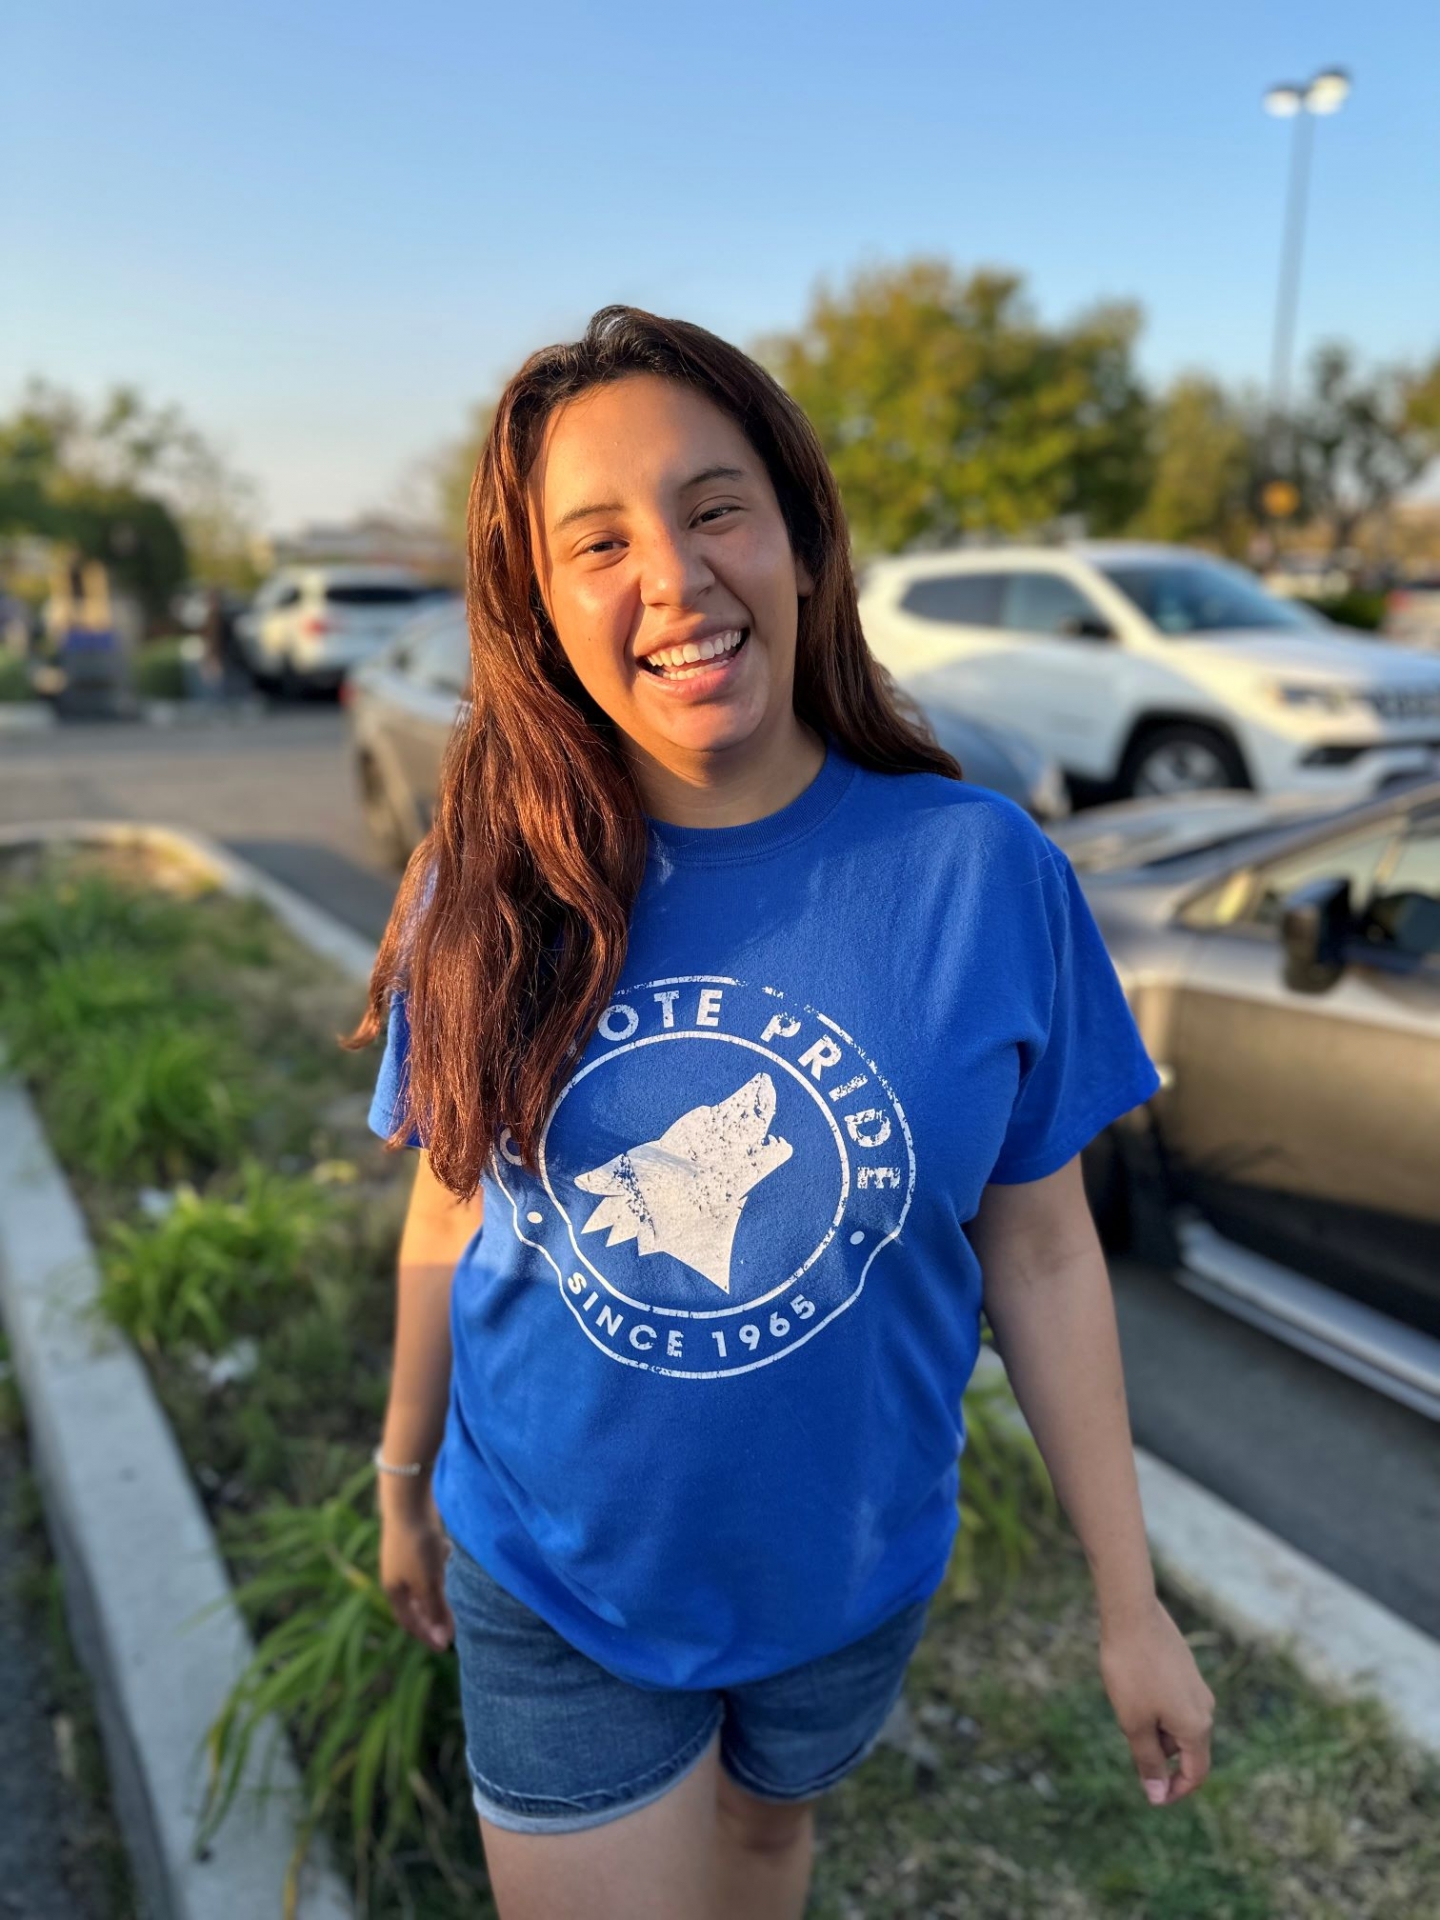 Young woman smiling outside wearing a blue CSUSB shirt